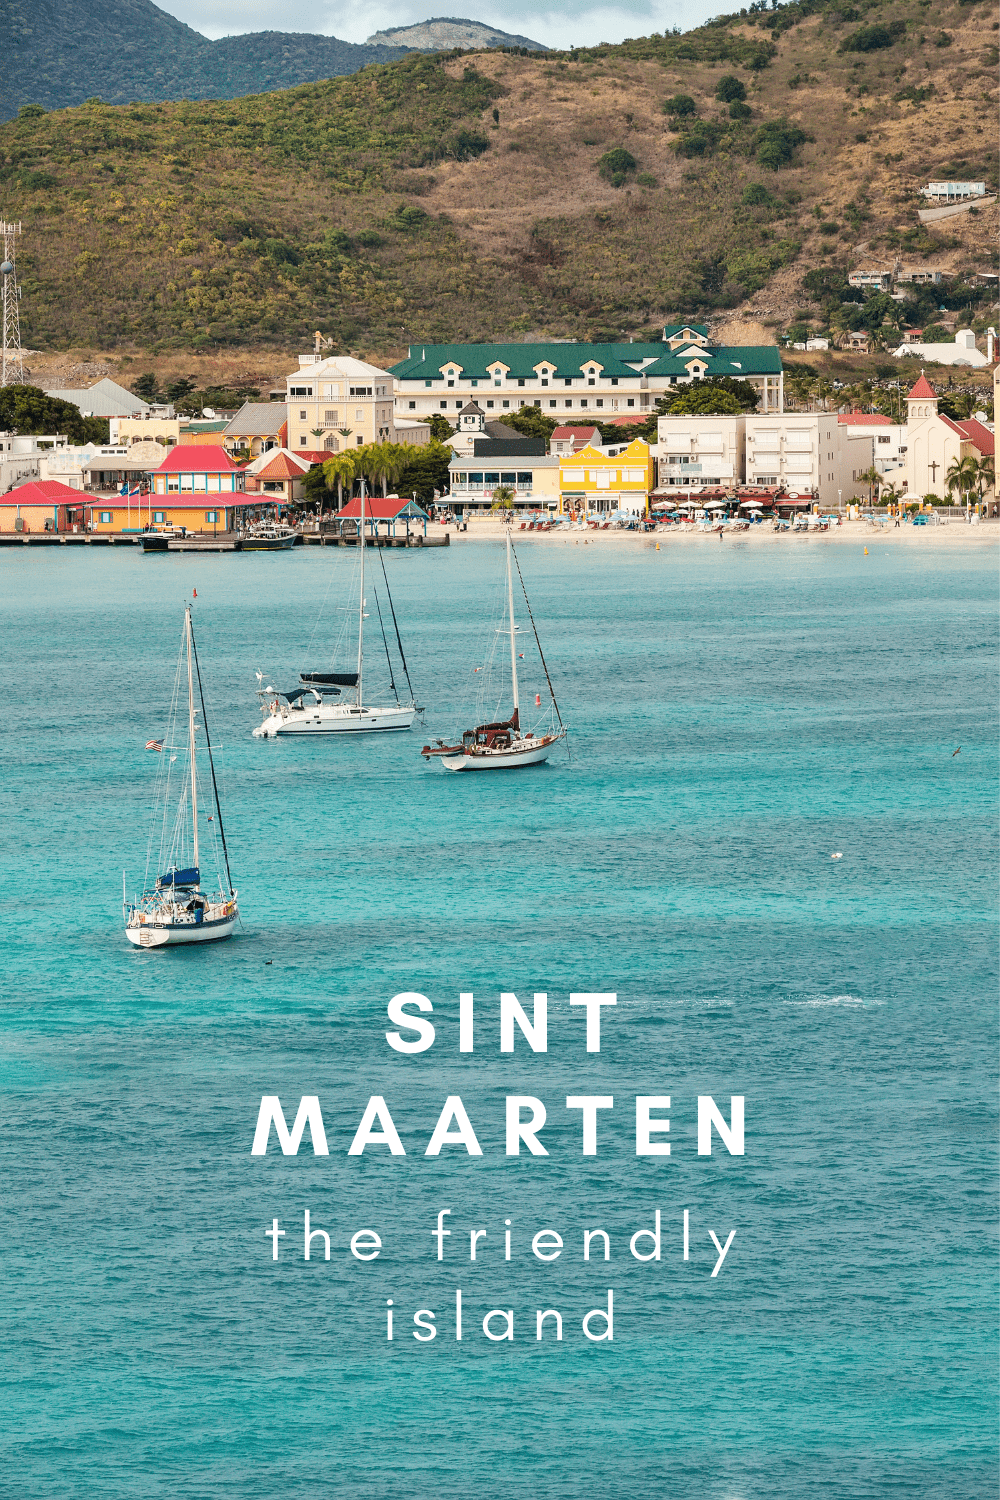 Sailboats at anchor at St. Maarten island, with small town and hill in background.. Text overlay says "sint maarten the friendly island." 
visit st. martin, st-martin, st. martin island, st. martens